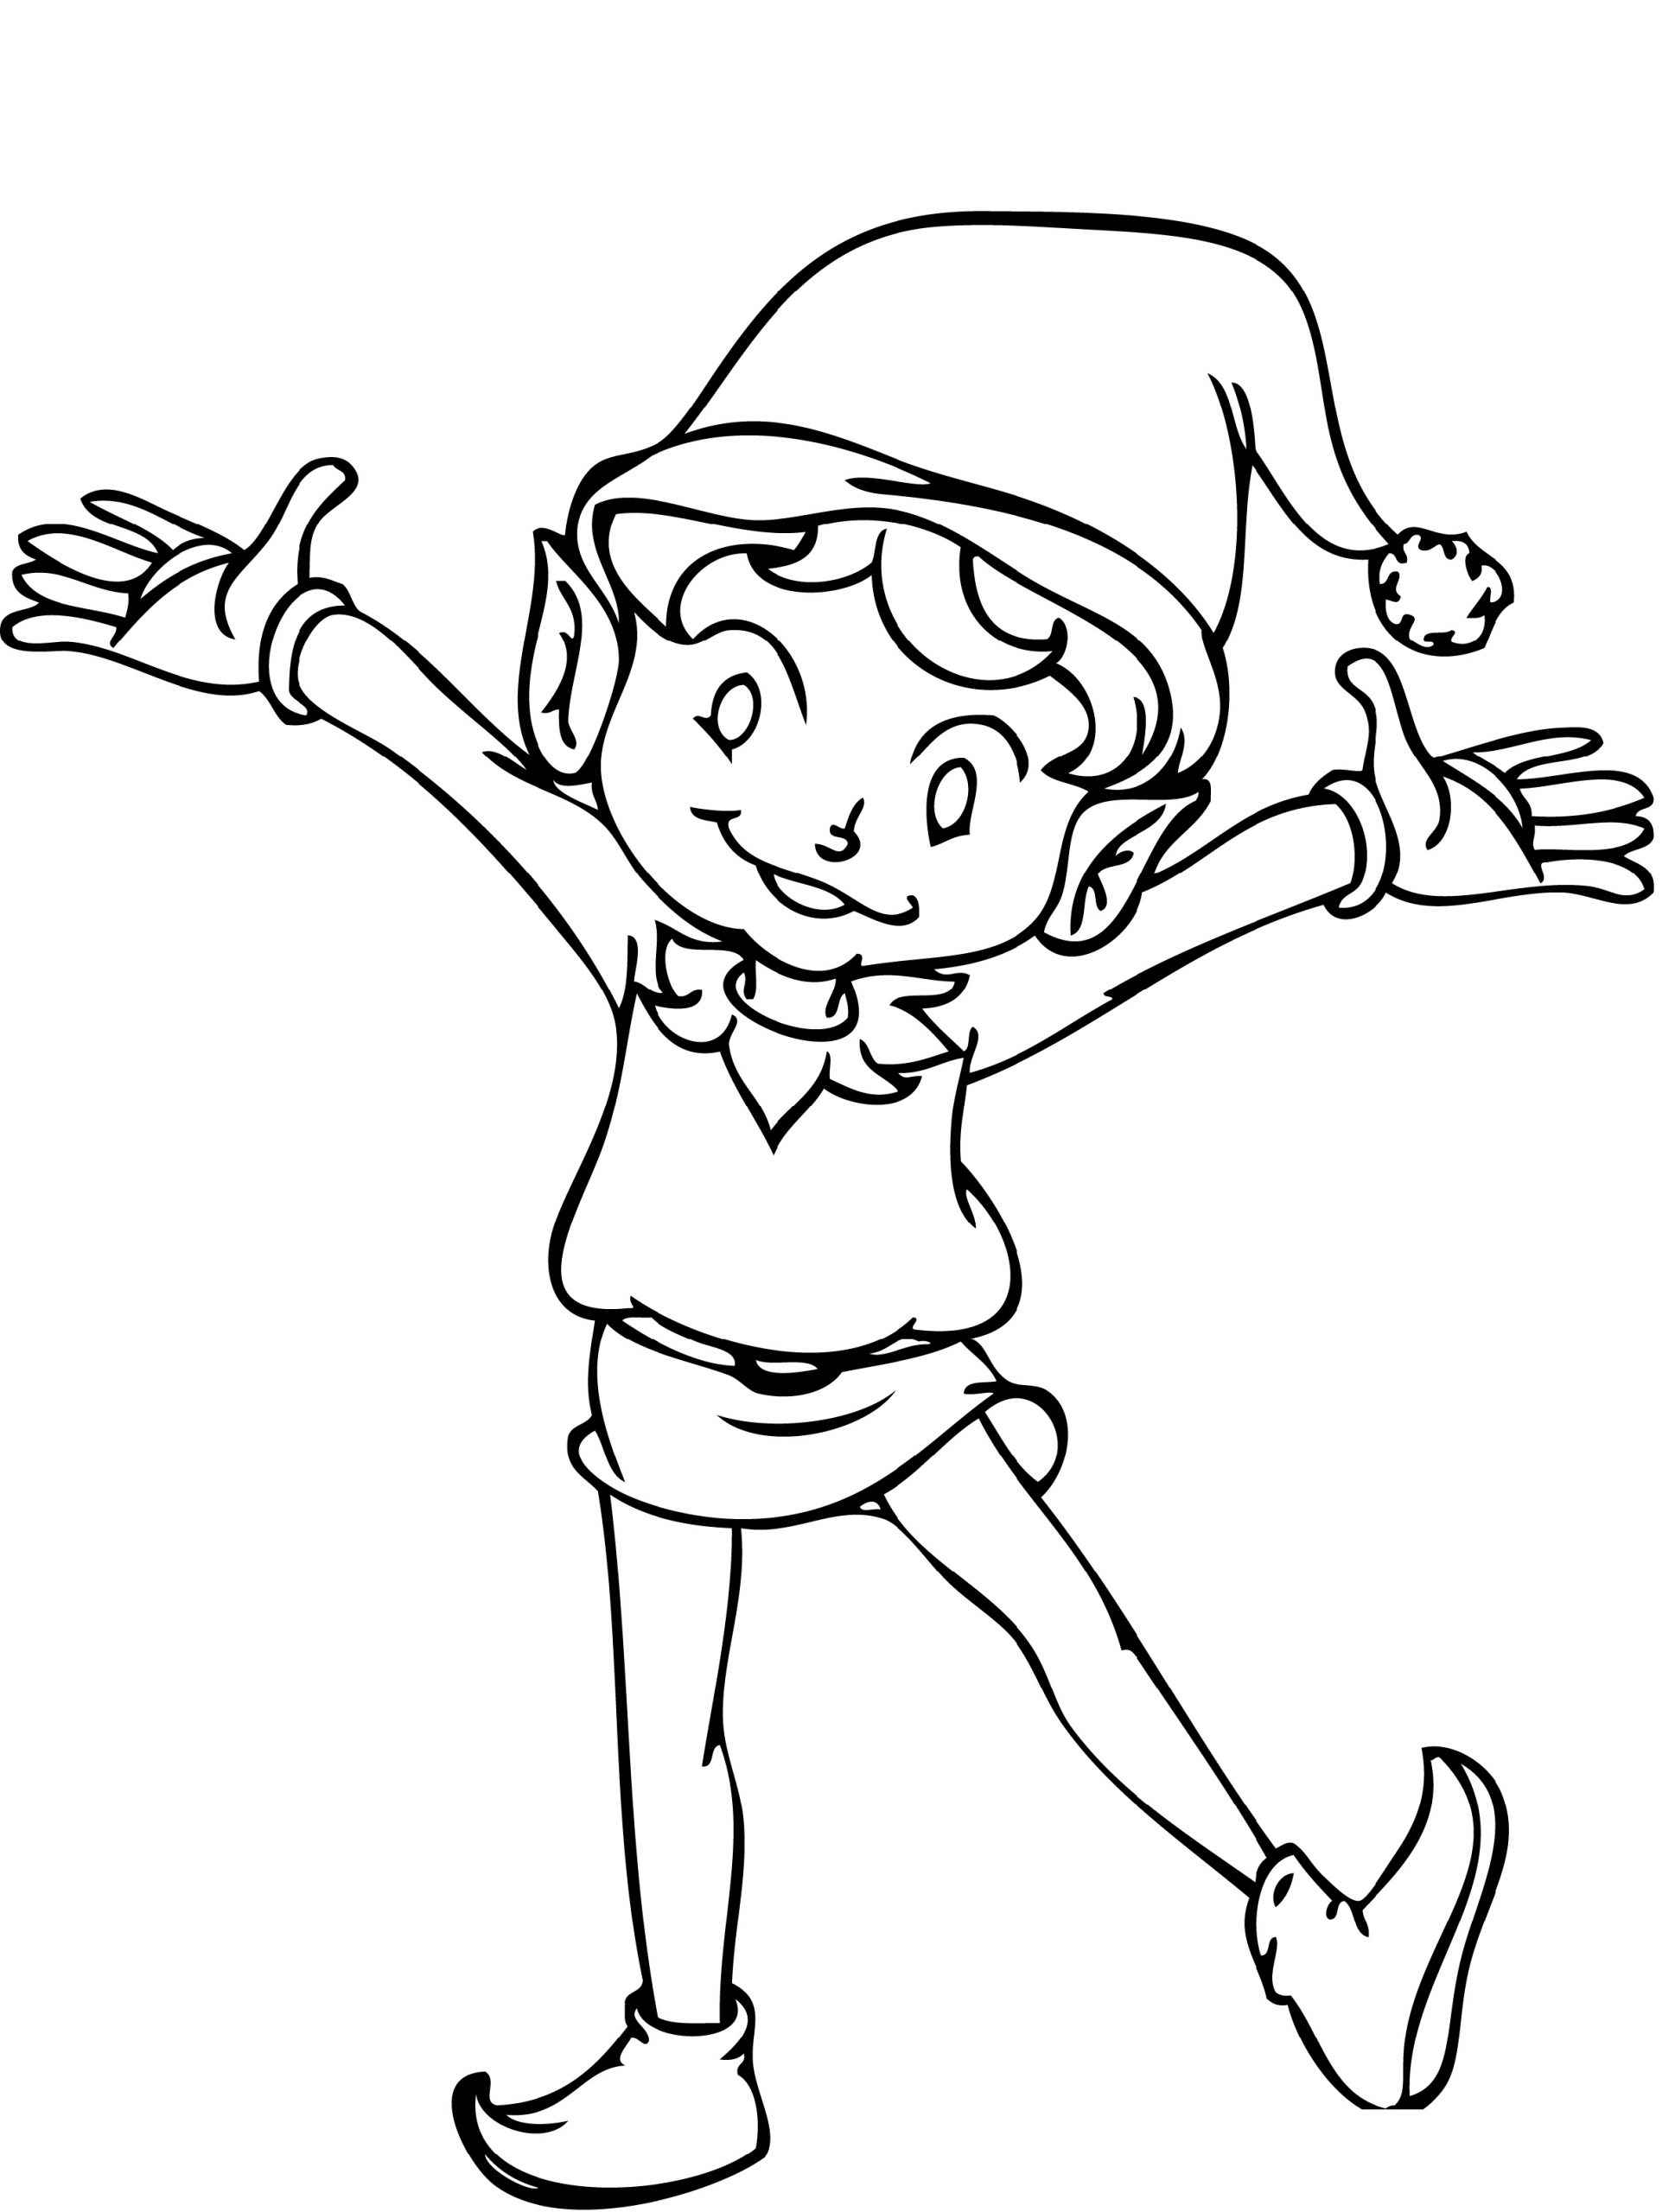 Elf on The Shelf Coloring Pages | 101 Coloring